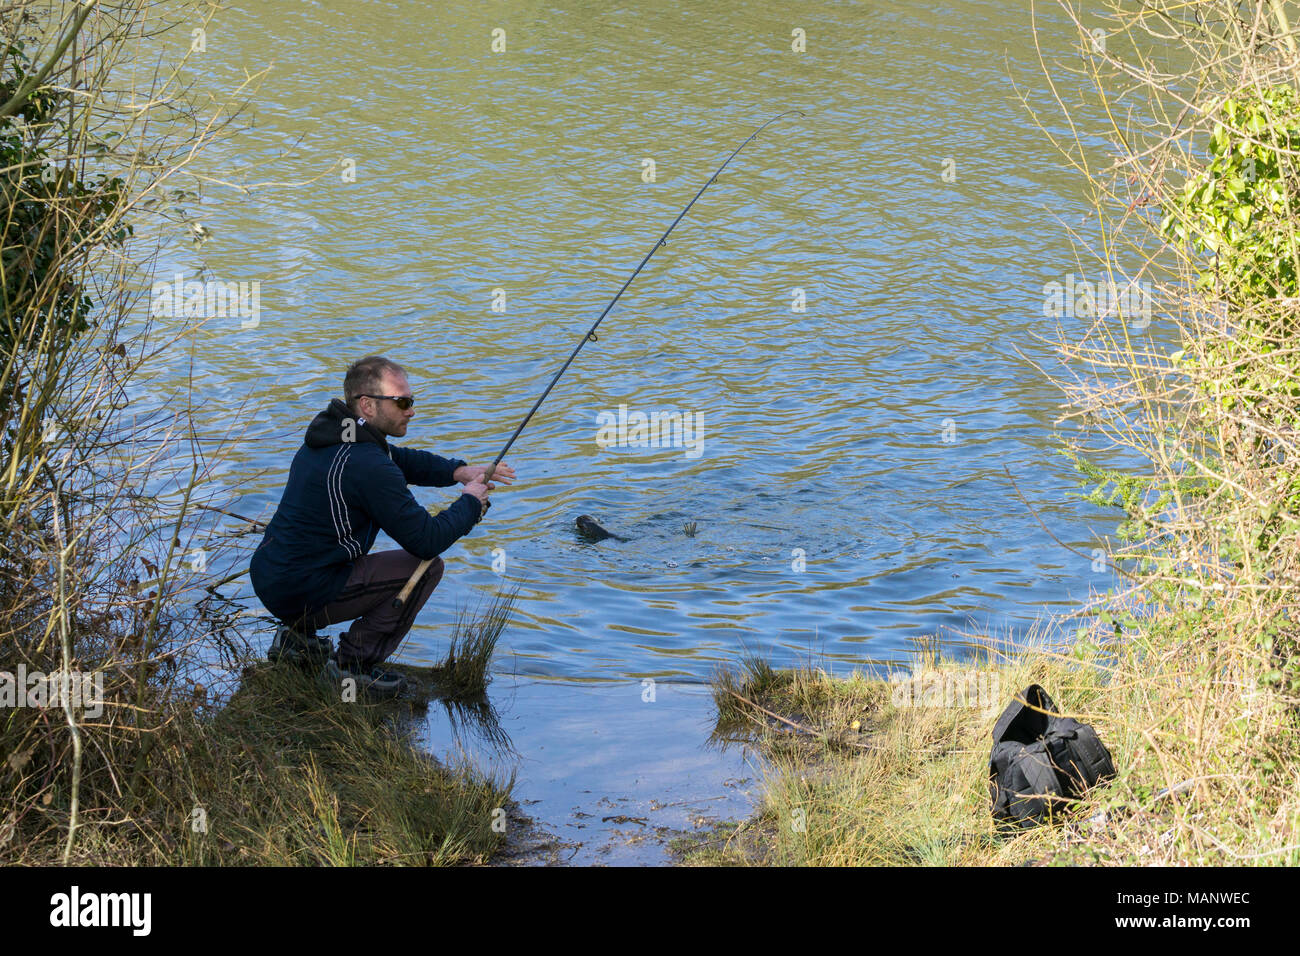 Angler with fish on hook Stock Photo